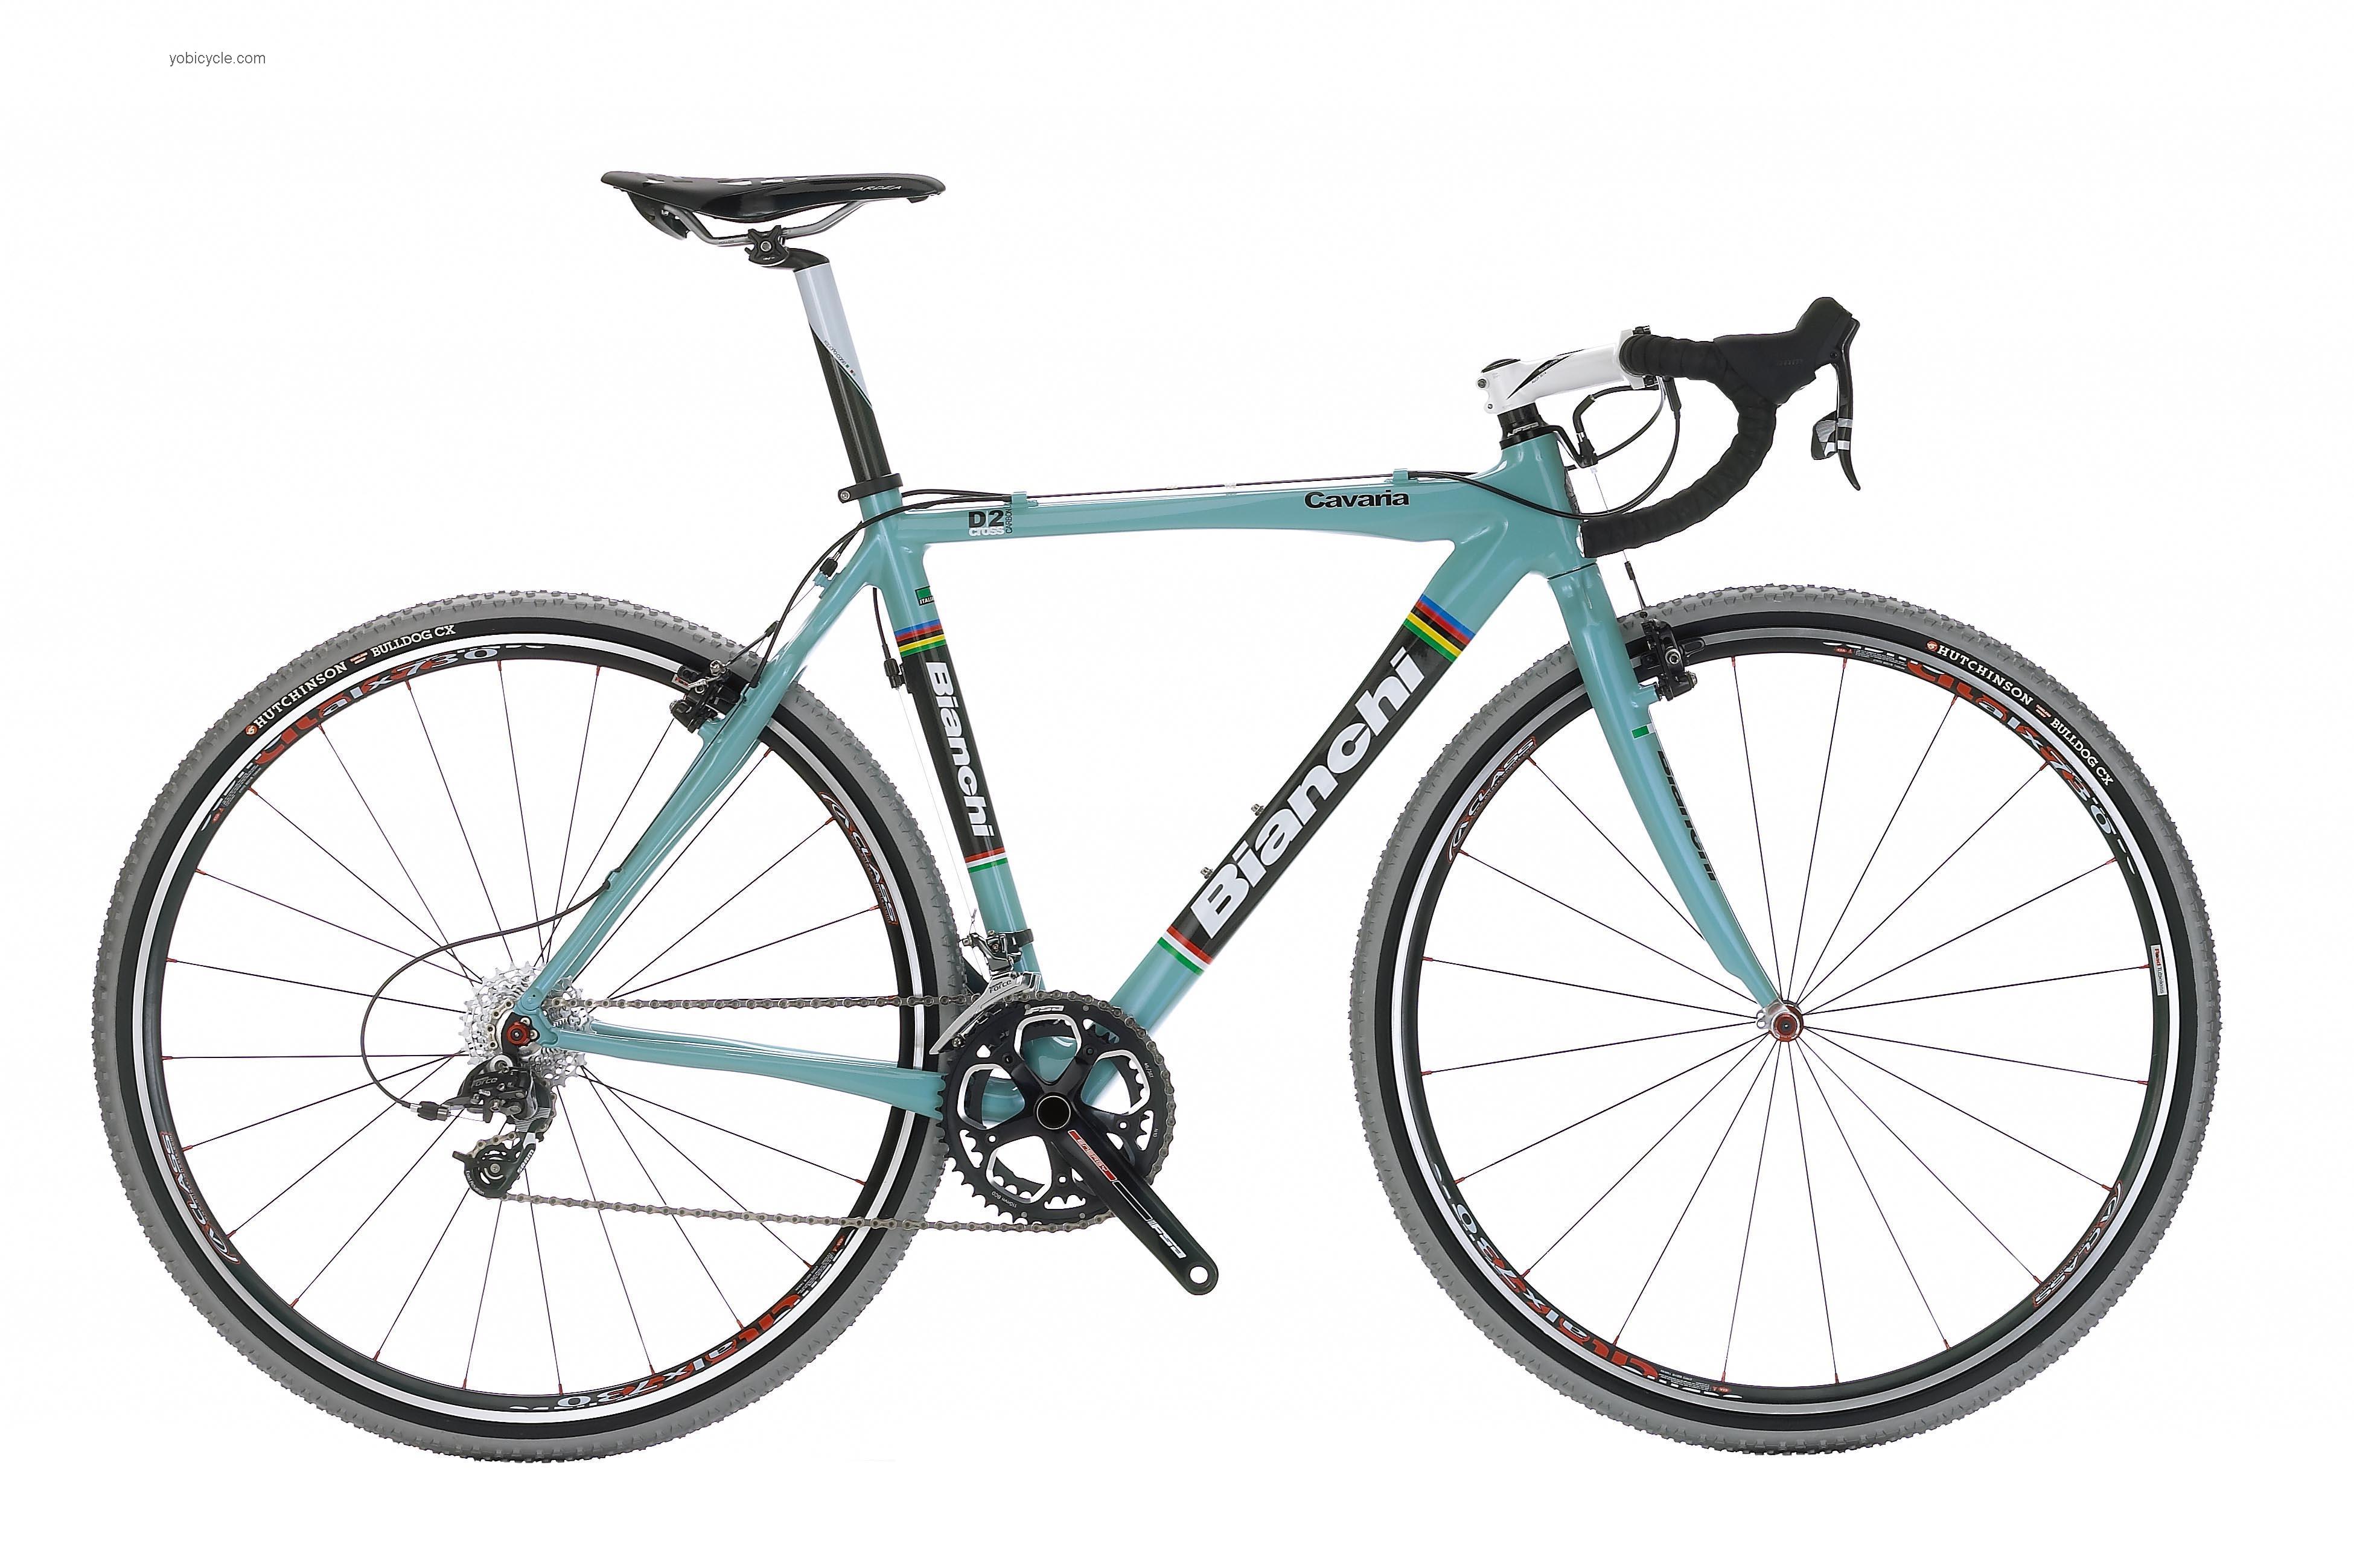 Bianchi Cavaria Force competitors and comparison tool online specs and performance